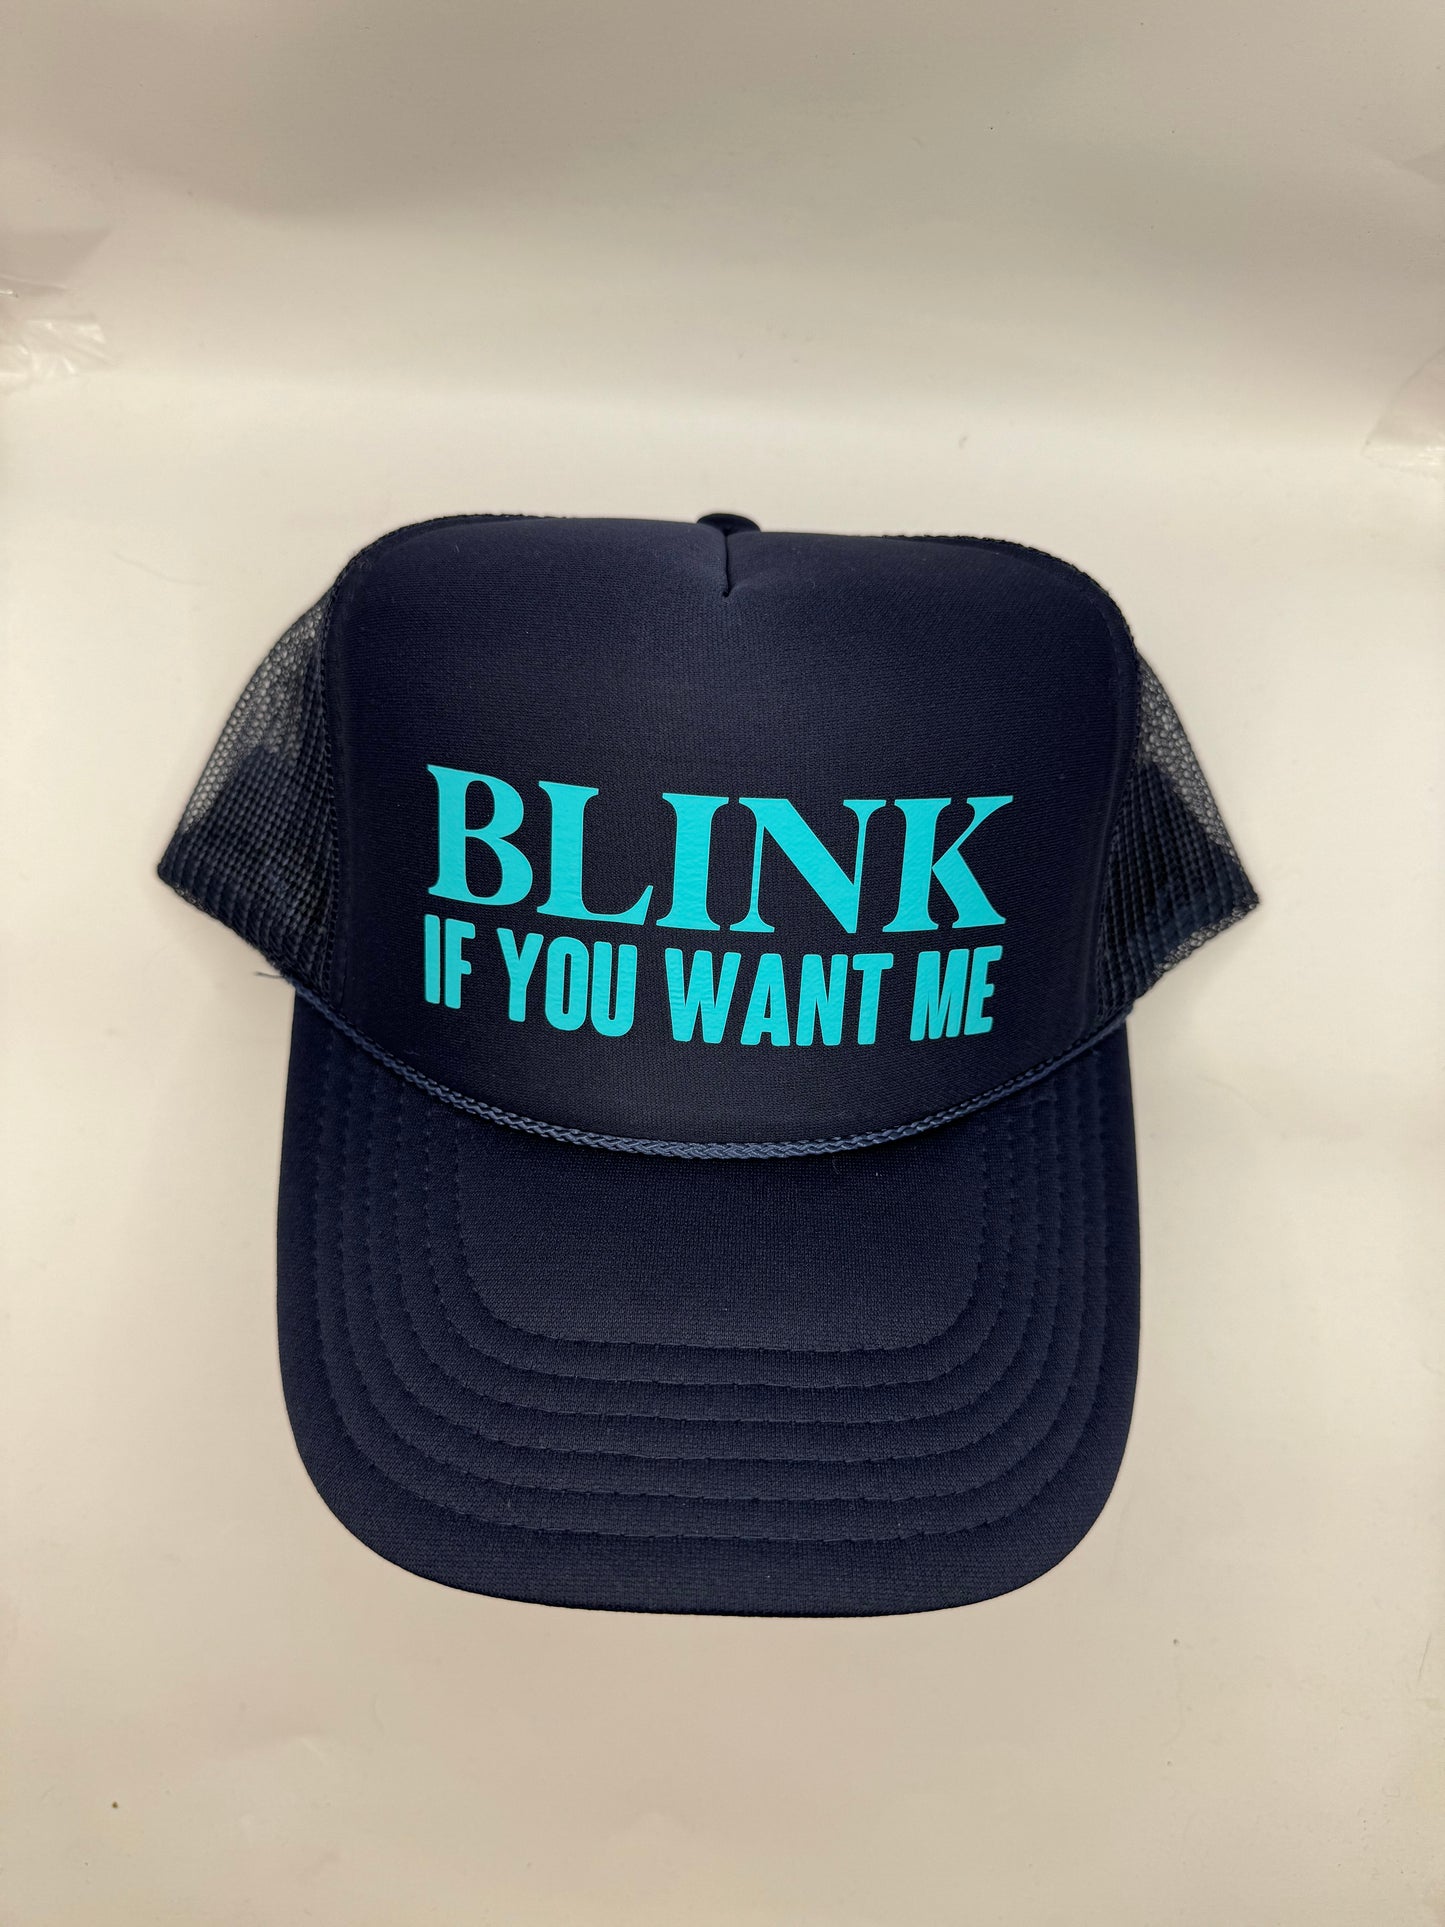 "Blink if you want me" Trucker Hat